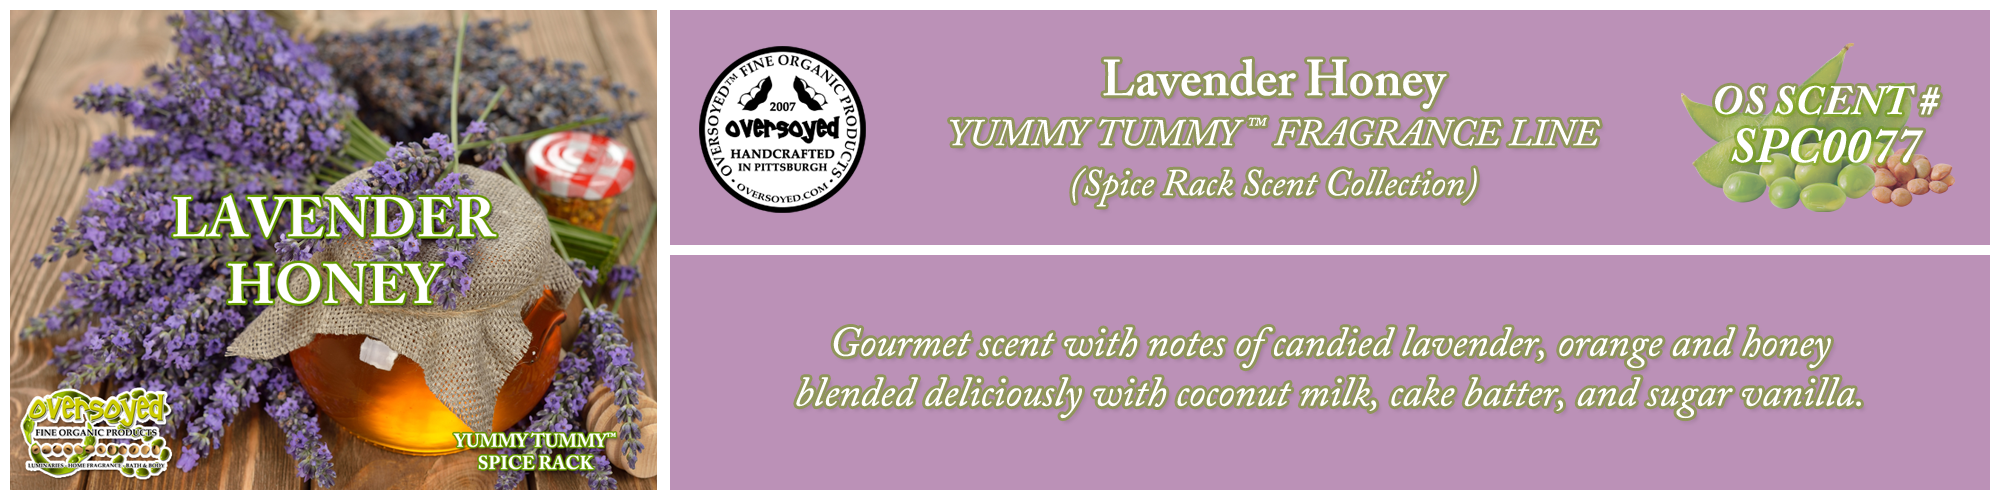 Lavender Honey Handcrafted Products Collection